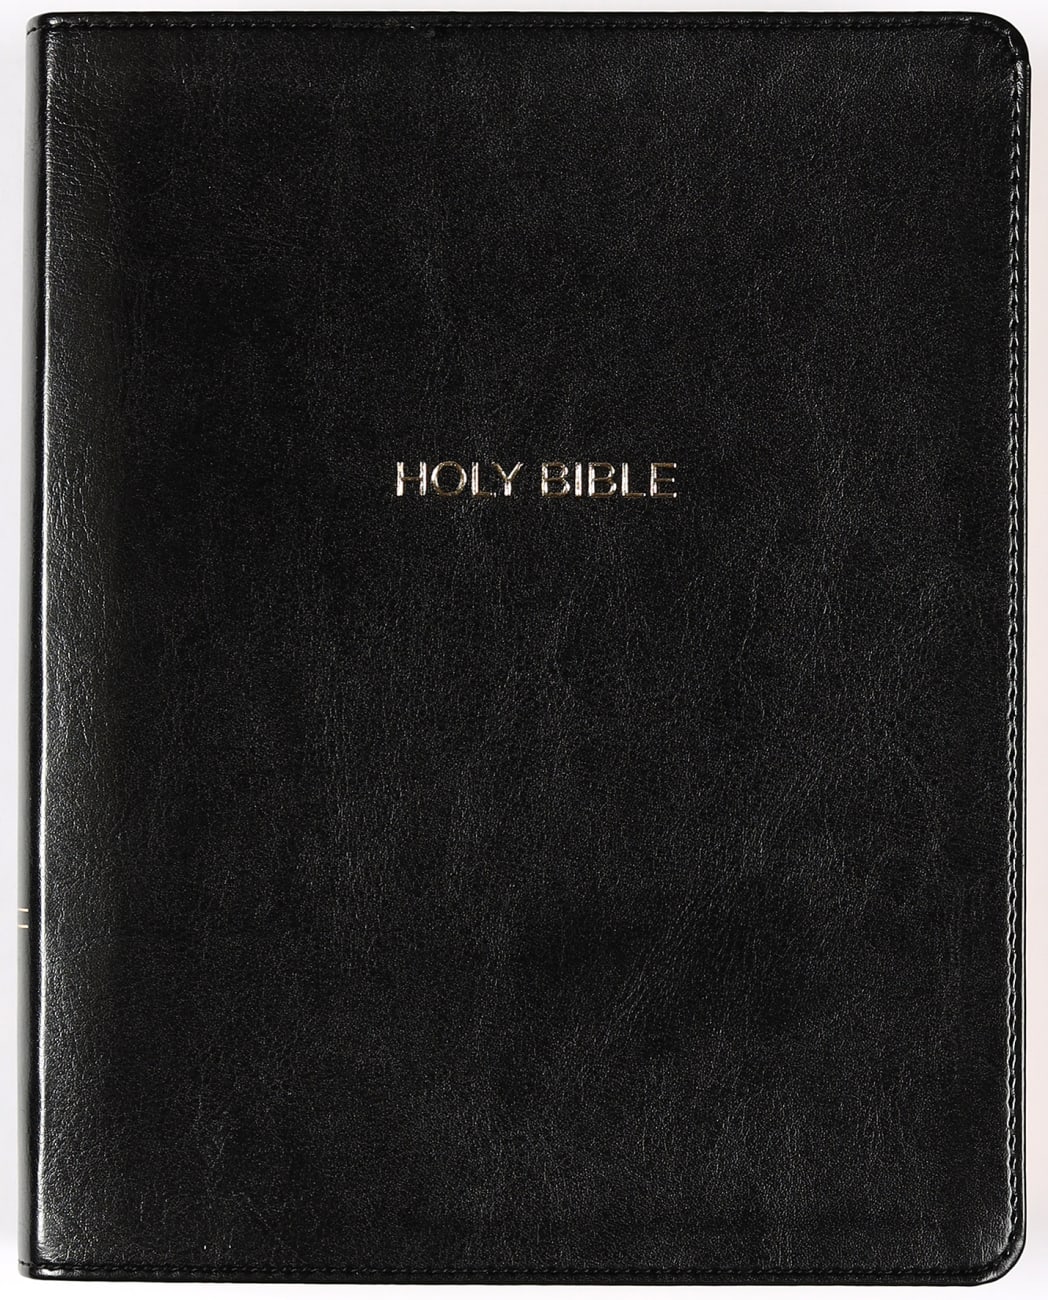 NKJV Journal the Word Bible Black (Red Letter Edition) Premium Imitation Leather